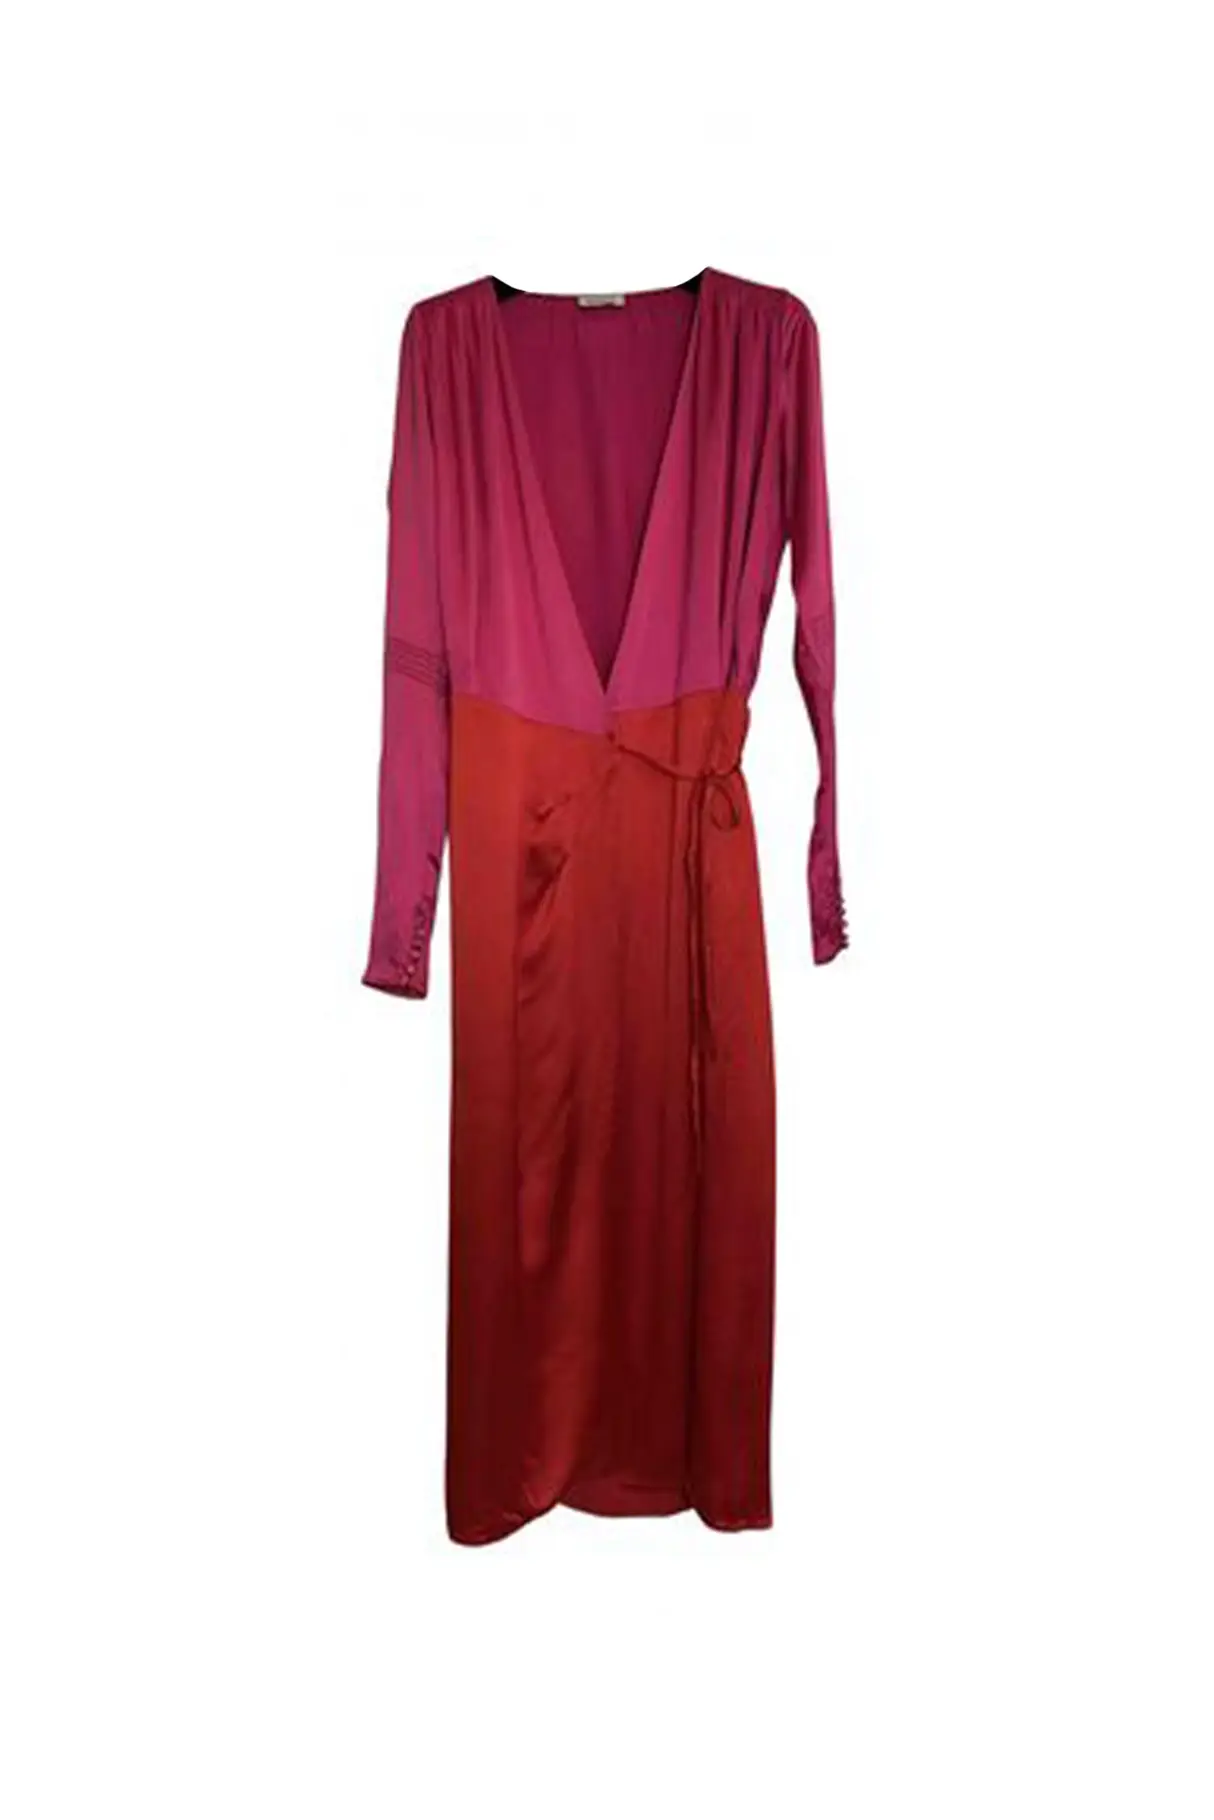 attico-dress-in-synthetic-red.jpg